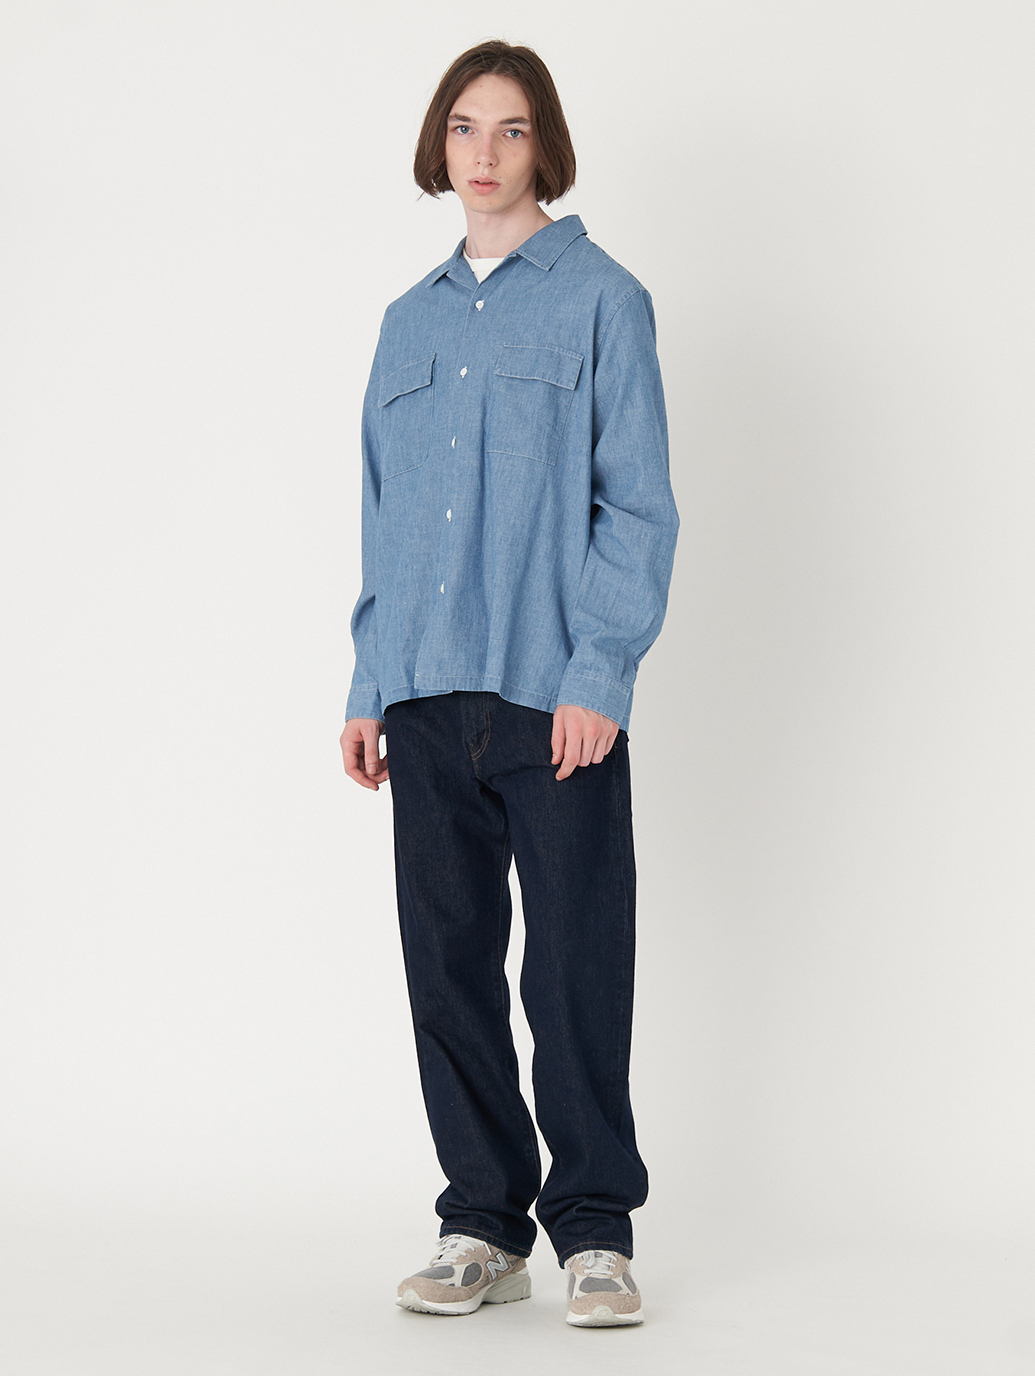 Levi's® Denim Family BY LEVI'S® MADE&CRAFTED® シャンブレーシャツ